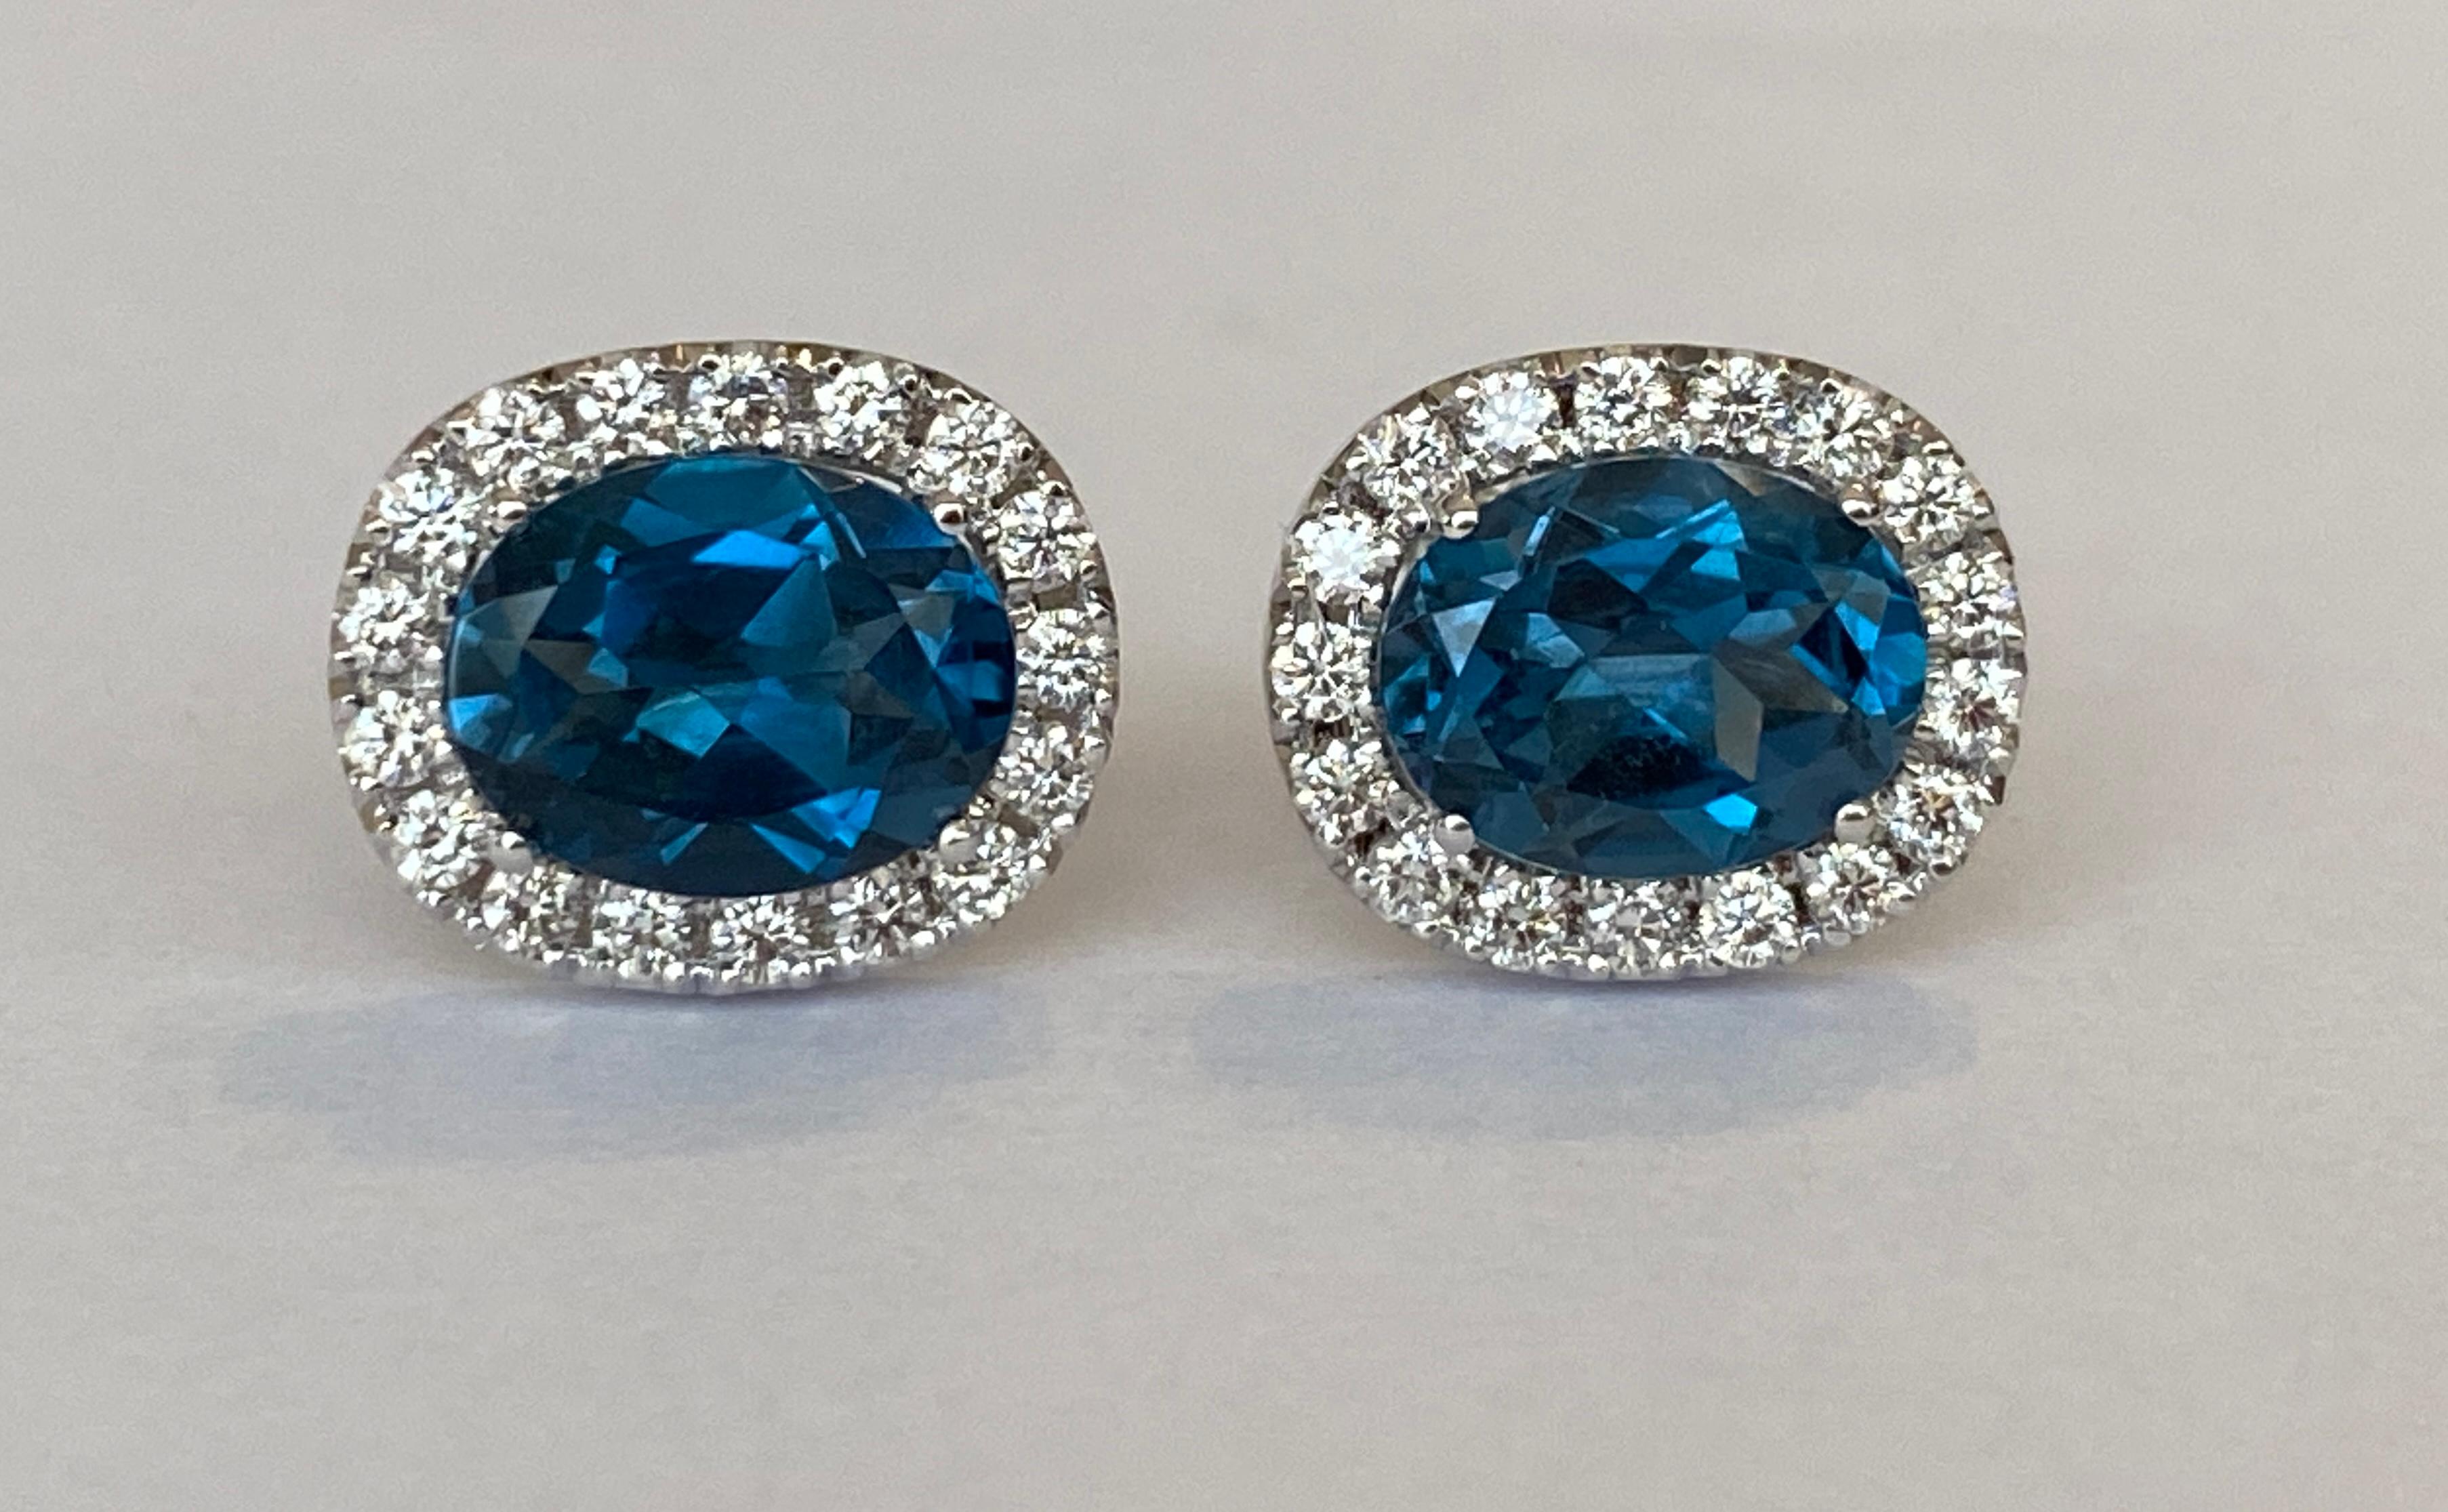 Offered in new condition, stud earrings in white gold, with two pieces of oval cut London Blue Topaz of approx. 4.5 carats together. The stones are surrounded by an entourage of 32 brilliant cut diamonds totaling approx. 0.58 ct of quality